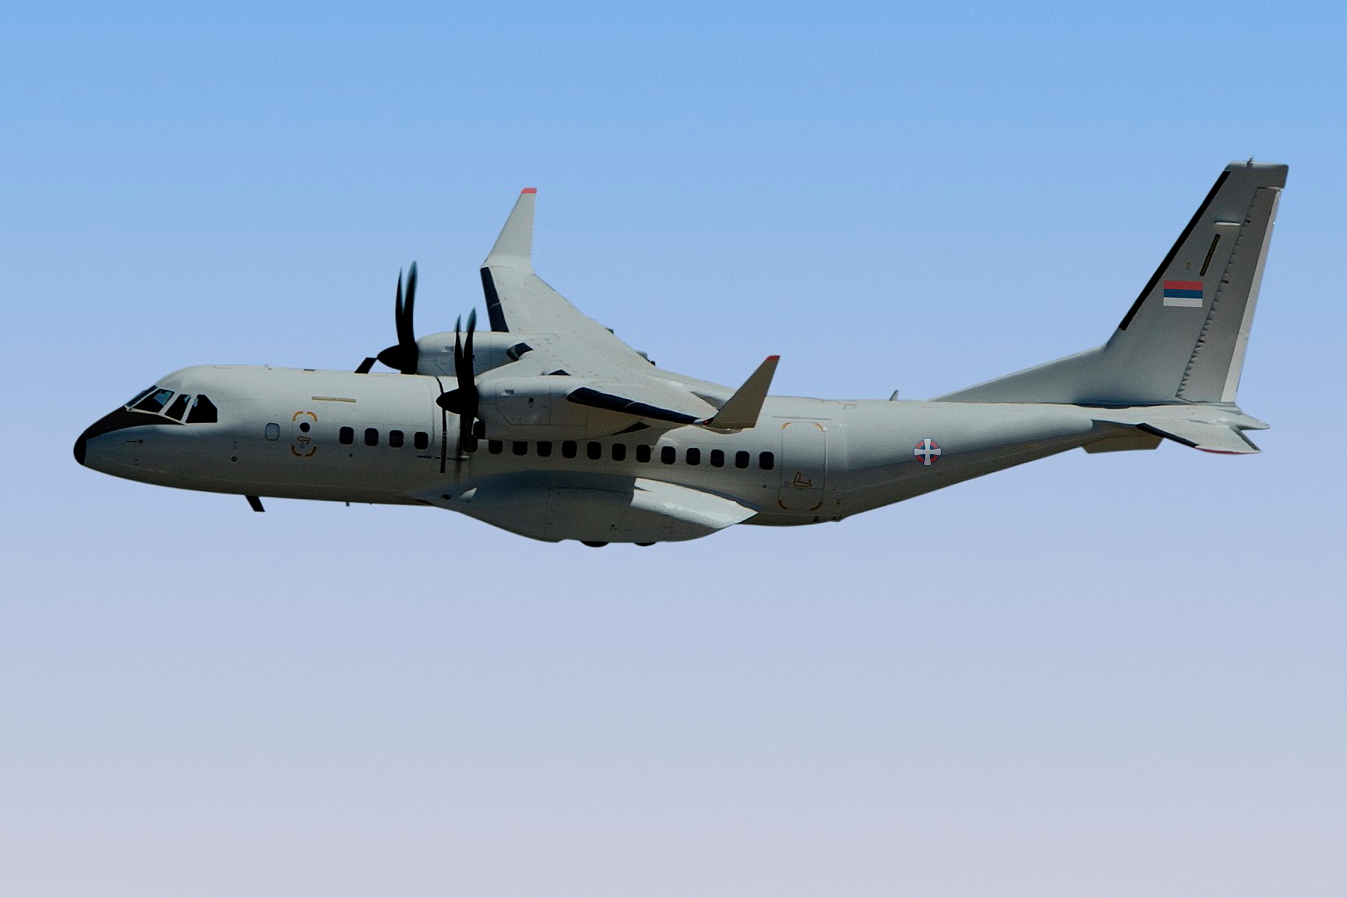 Serbian Air Force Airbus C295. Click to enlarge.